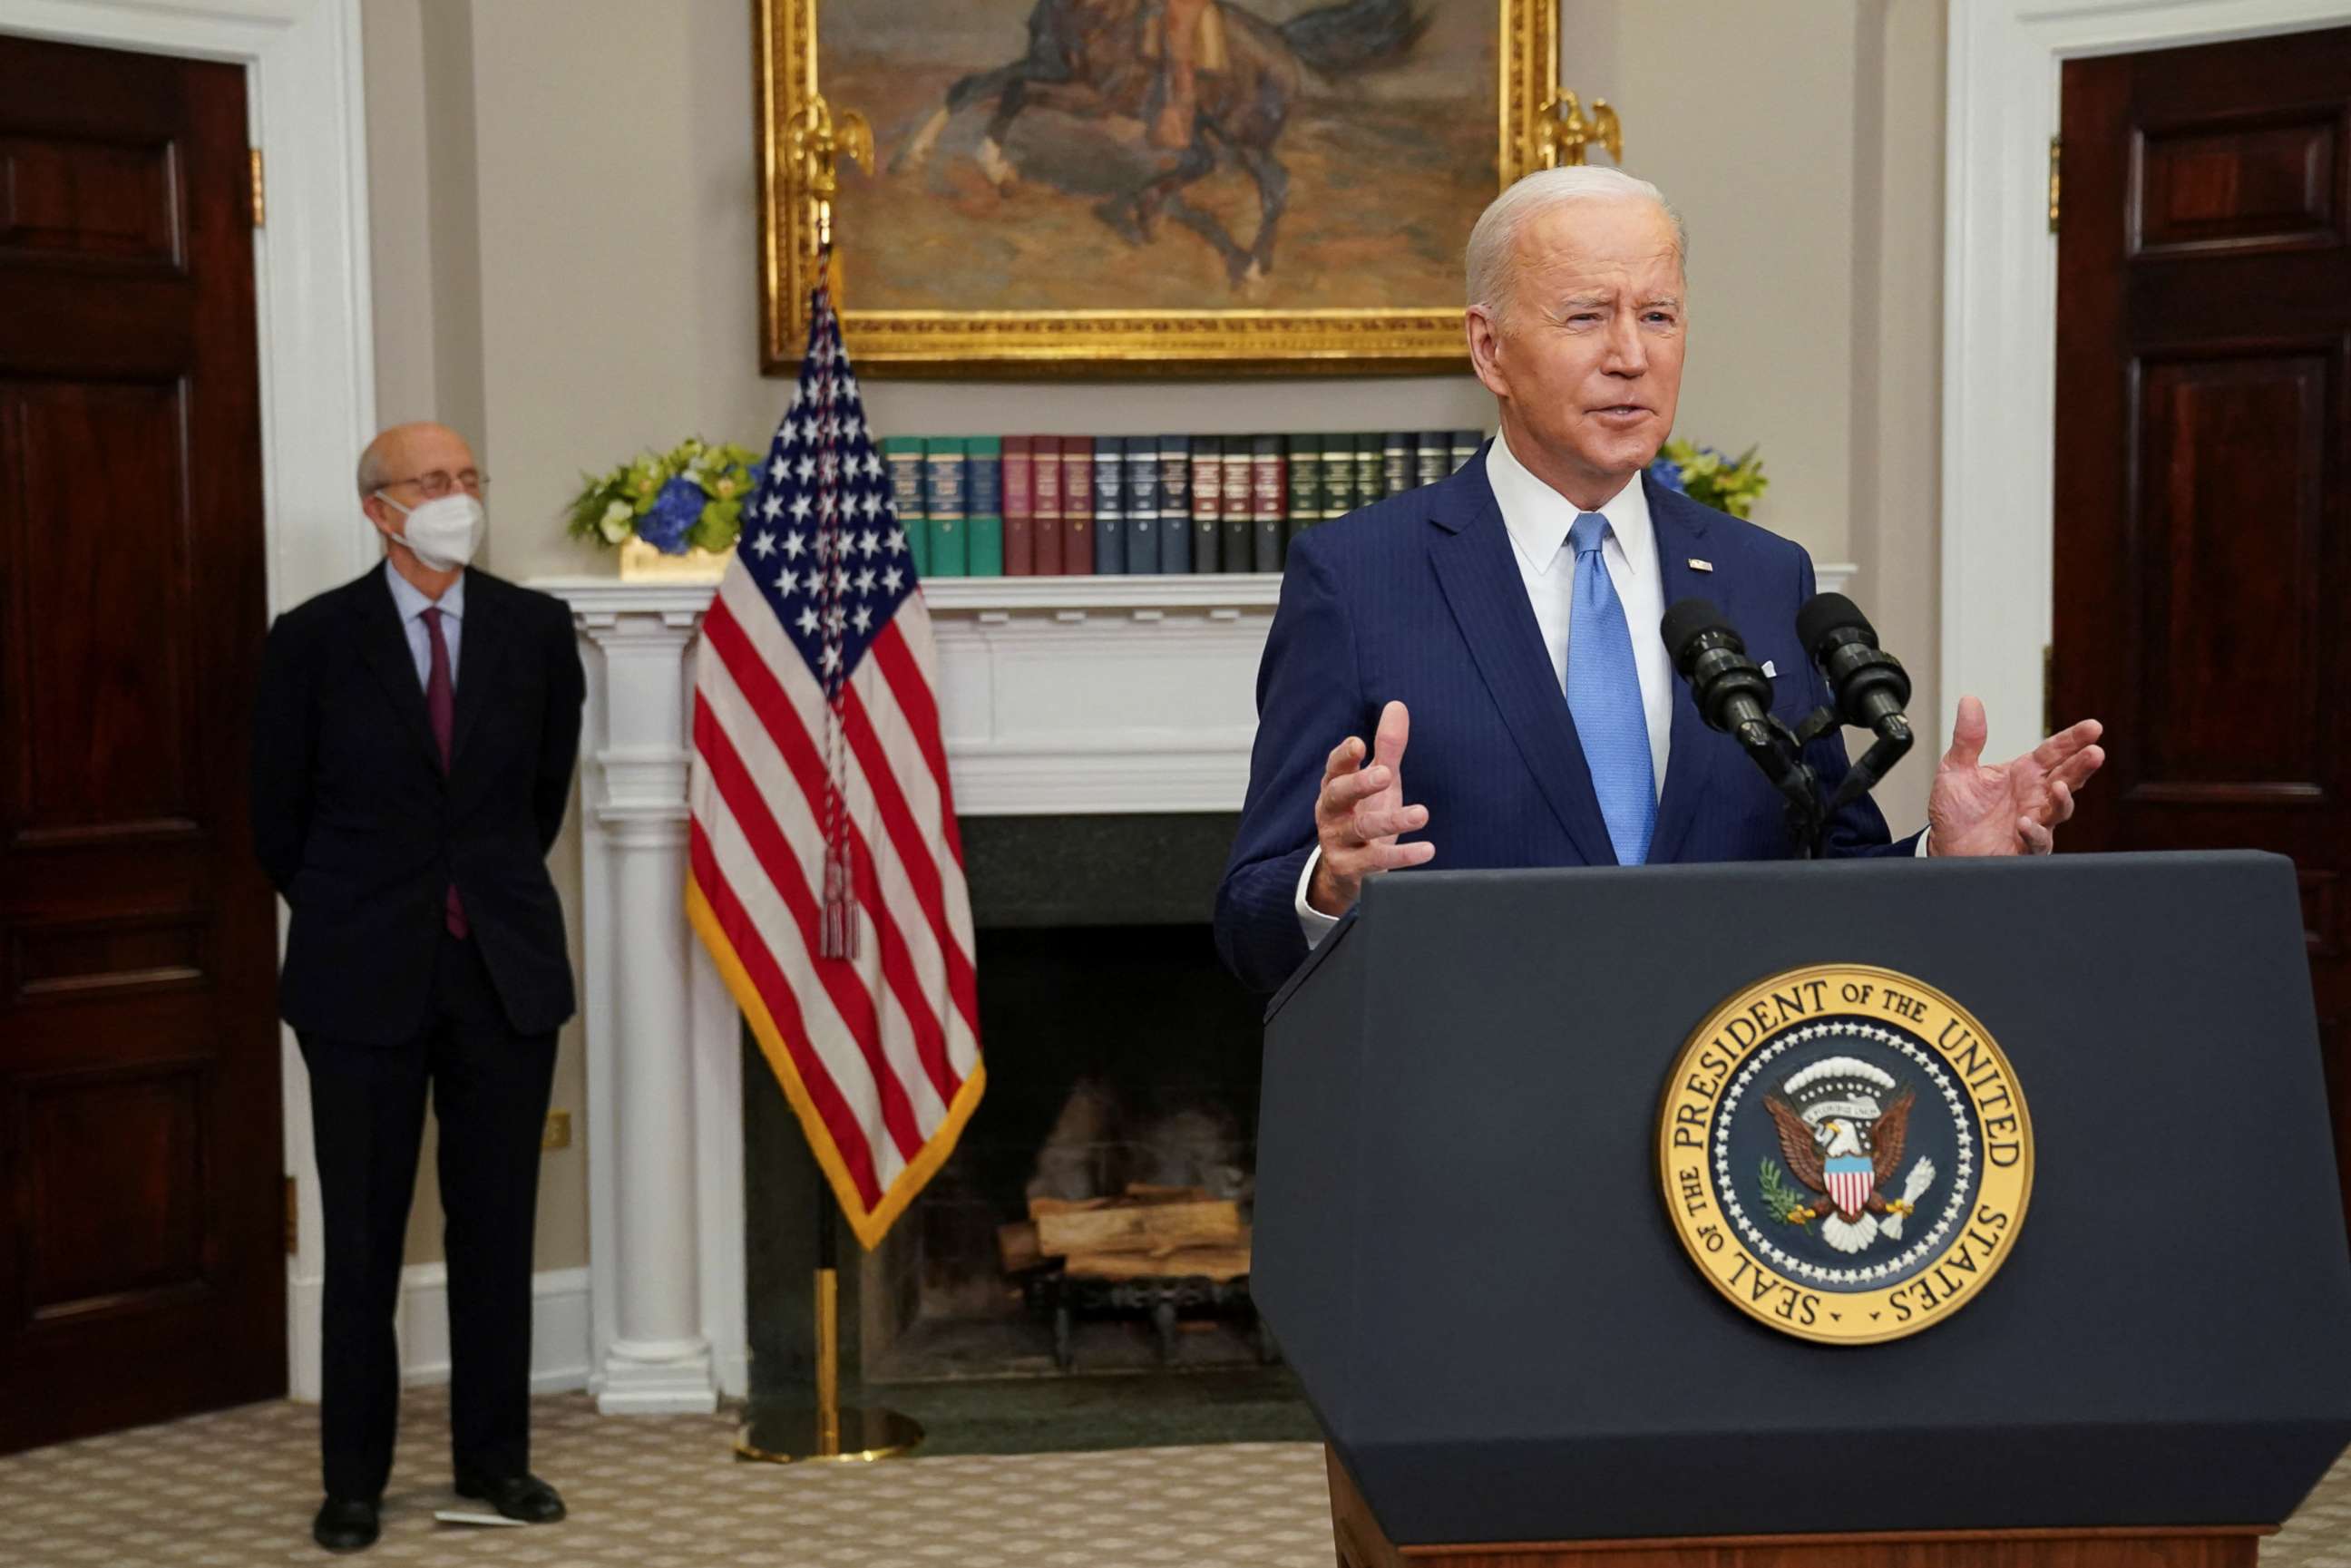 PHOTO: President Joe Biden delivers remarks with Supreme Court Justice Stephen Breyer as they announce Breyer will retire at the end of the court's current term, at the White House in Washington, D.C., Jan. 26, 2022.